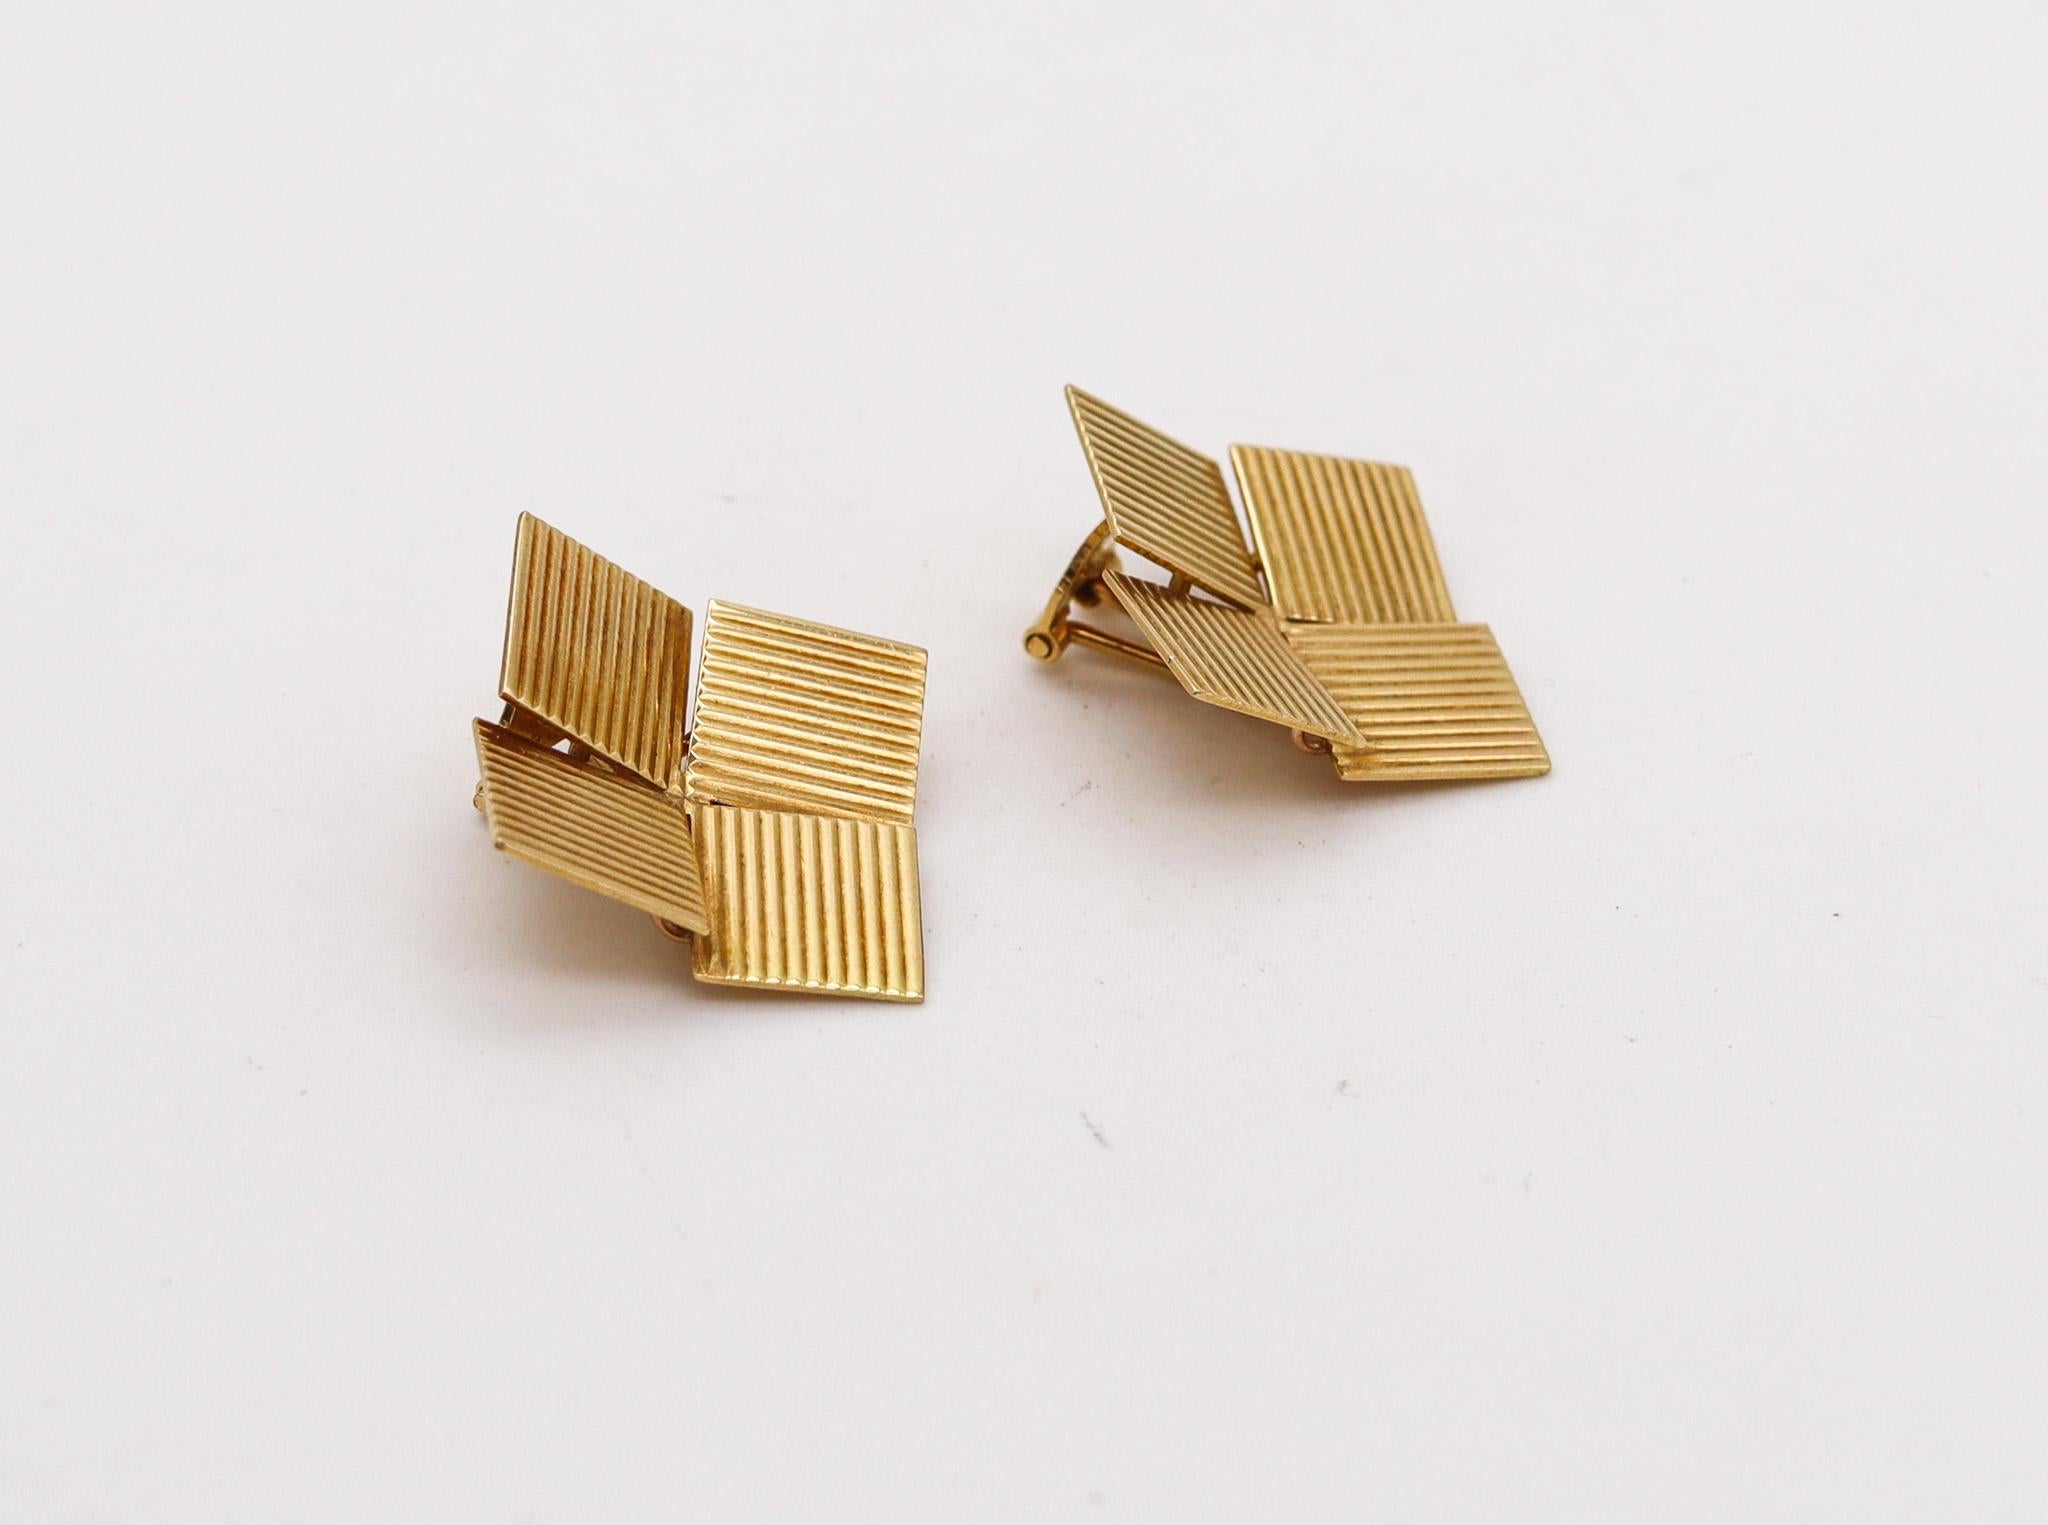 Modernist Italian 1970 Geometric Squares Clip on Earrings In Solid 18Kt Yellow Gold